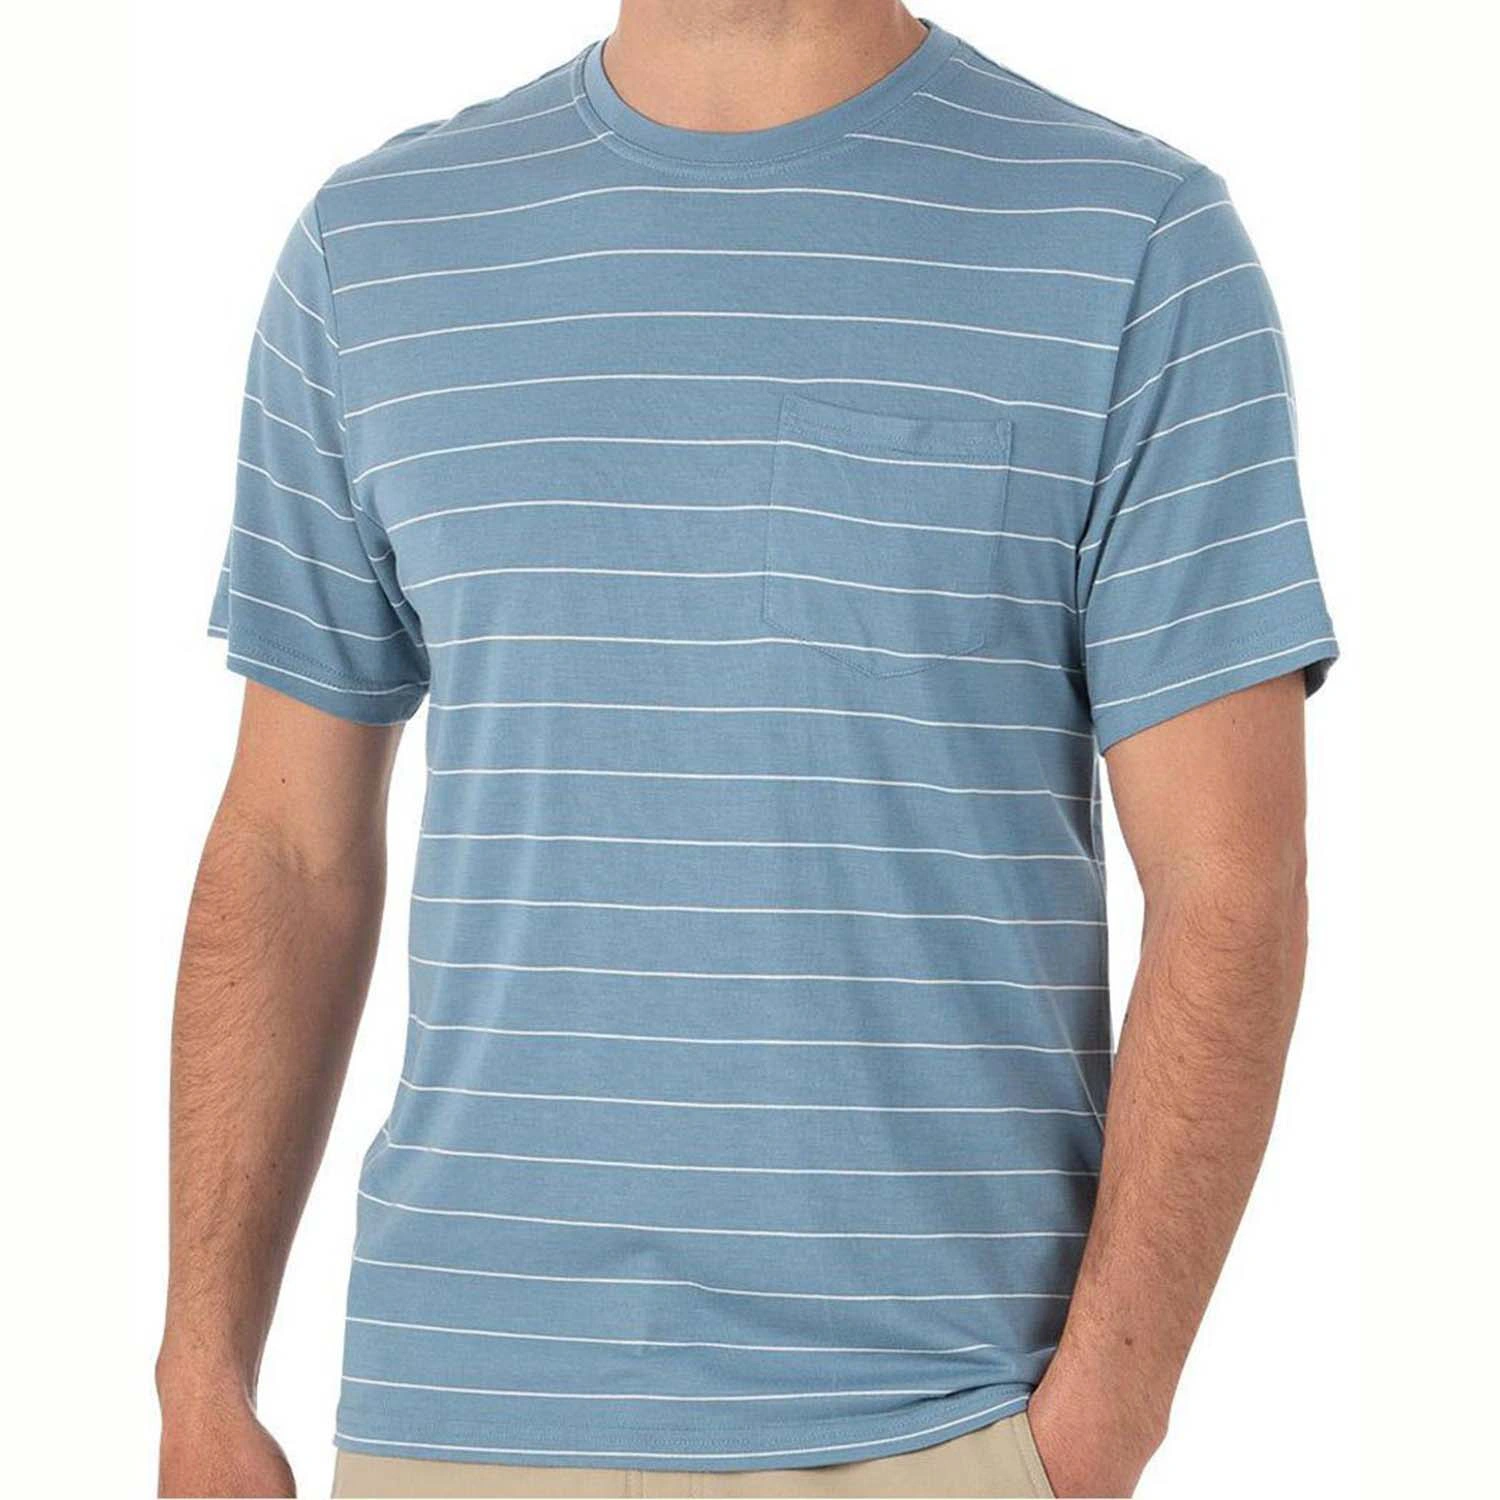 Wholesale Mens Striped T Shirt Supplier In Bangladesh